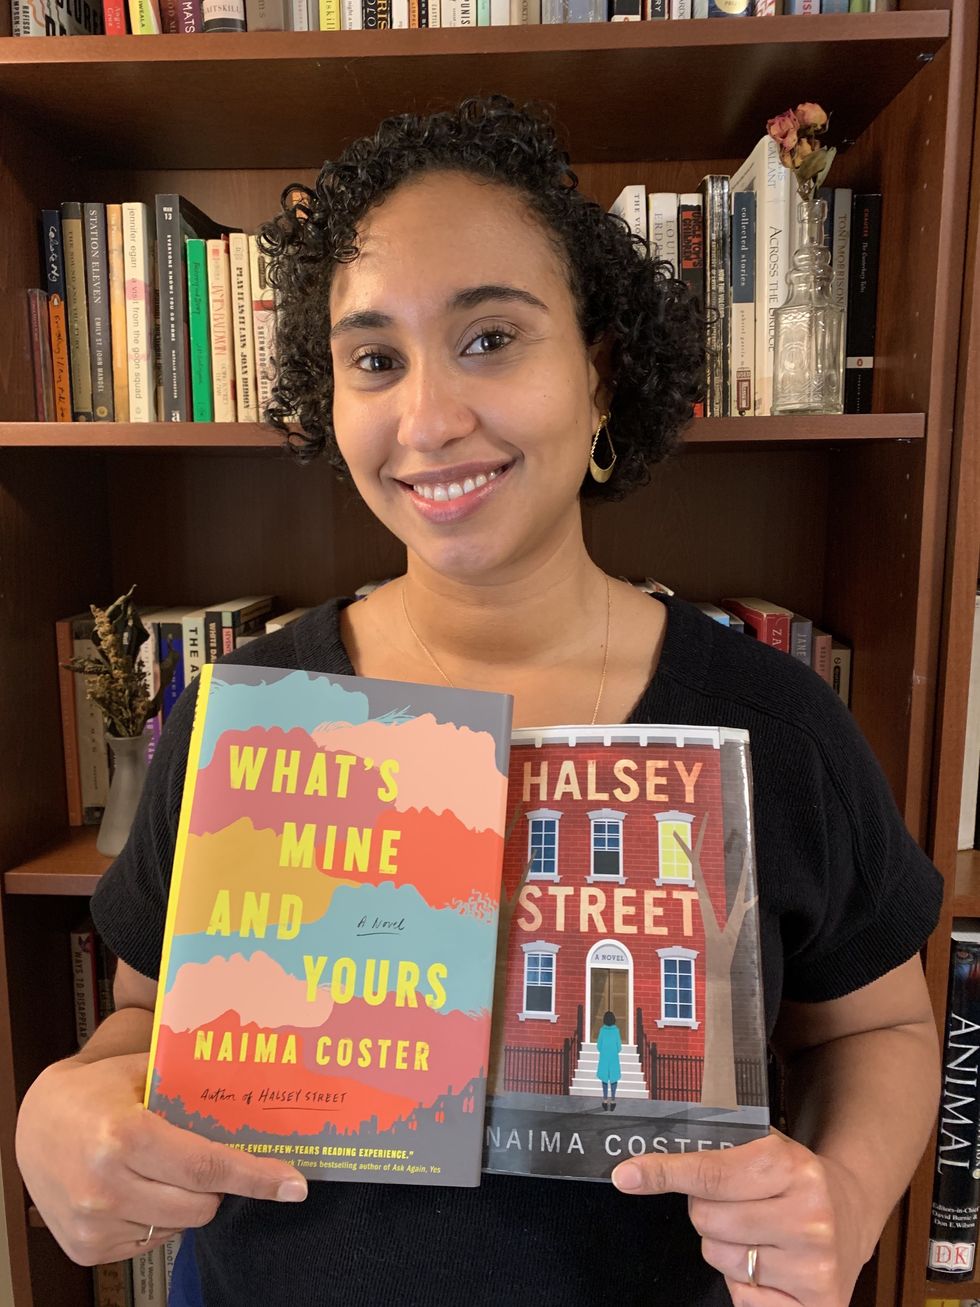 author naima coster with her two books 'halsey street' and 'what's mine and yours'